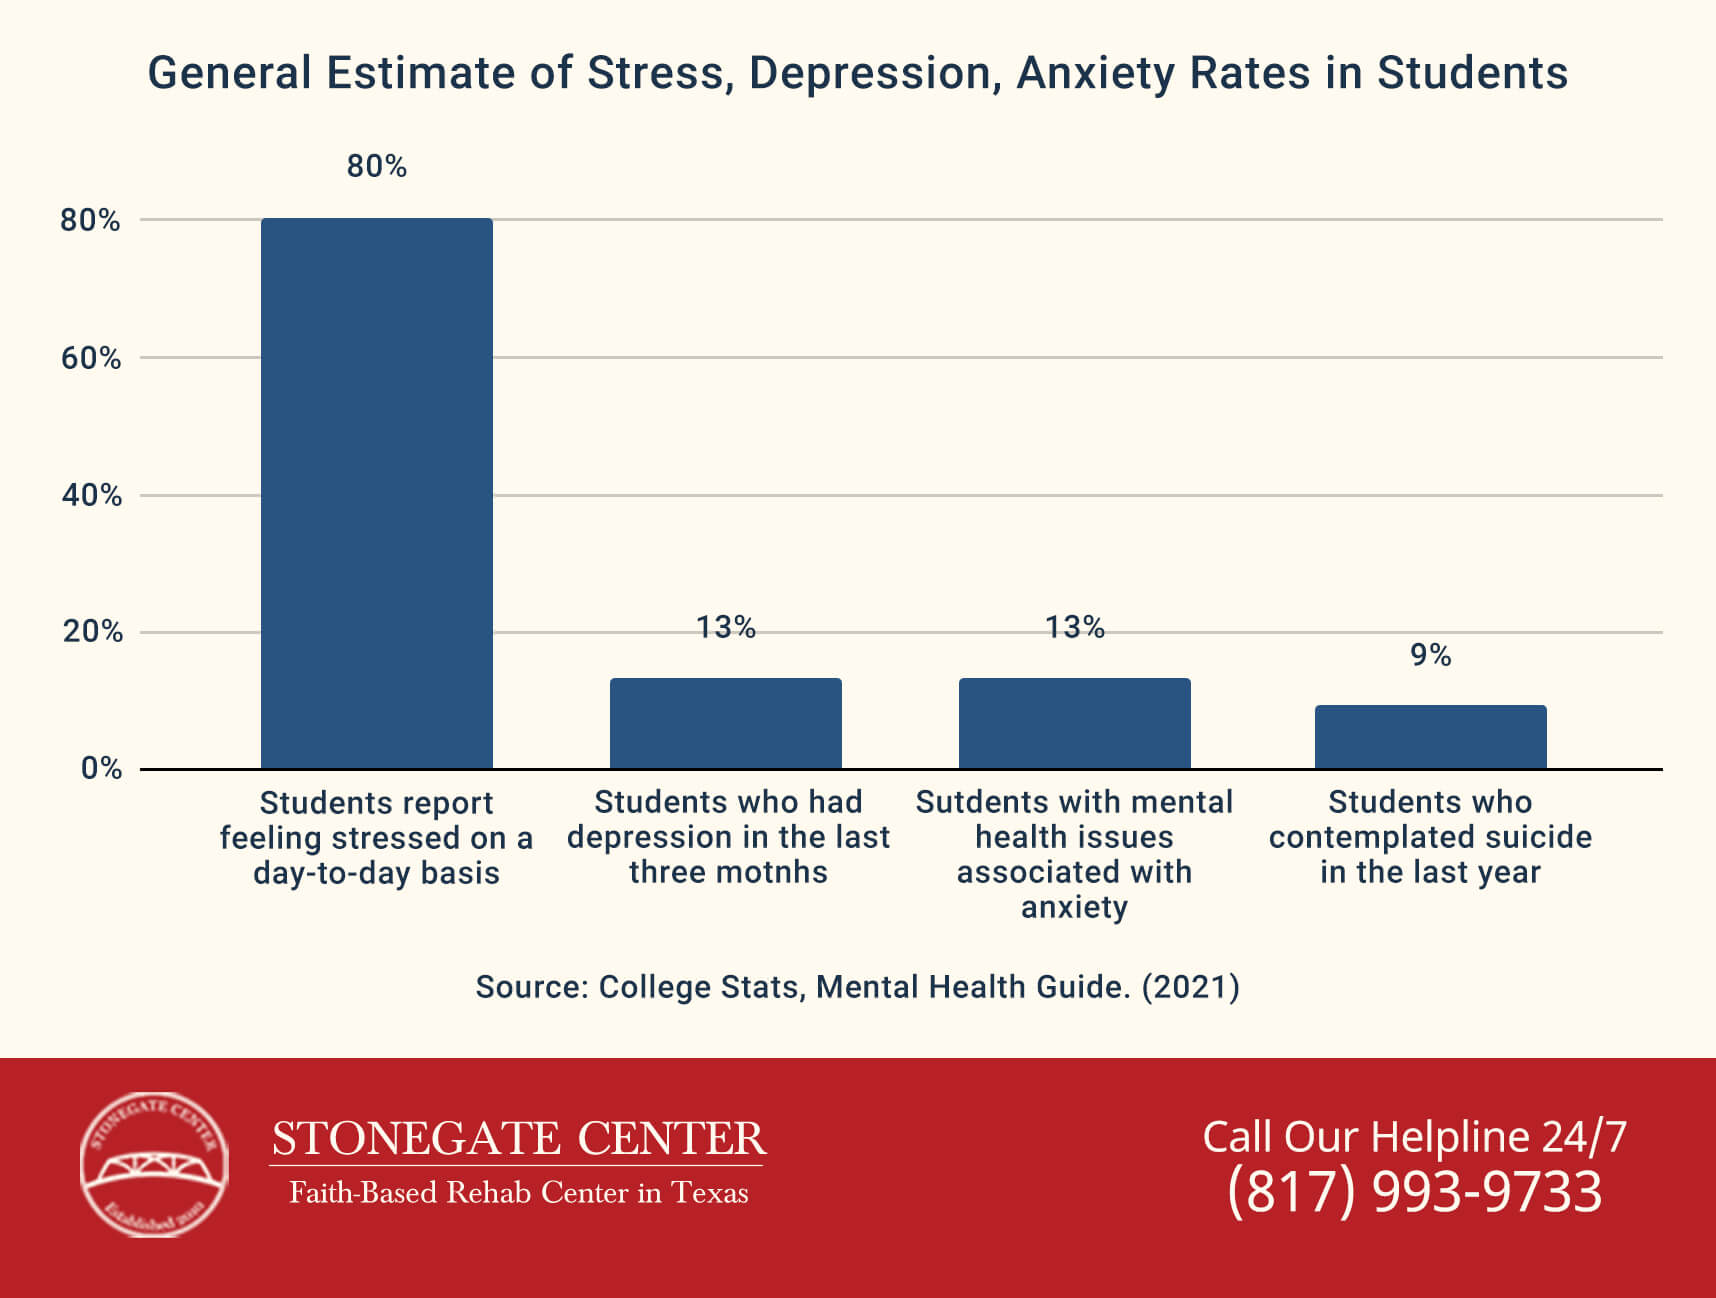 Stonegate Center Blog - Guide to College Drug Abuse & Mental Health - General Estimate of Stress in Students Graph